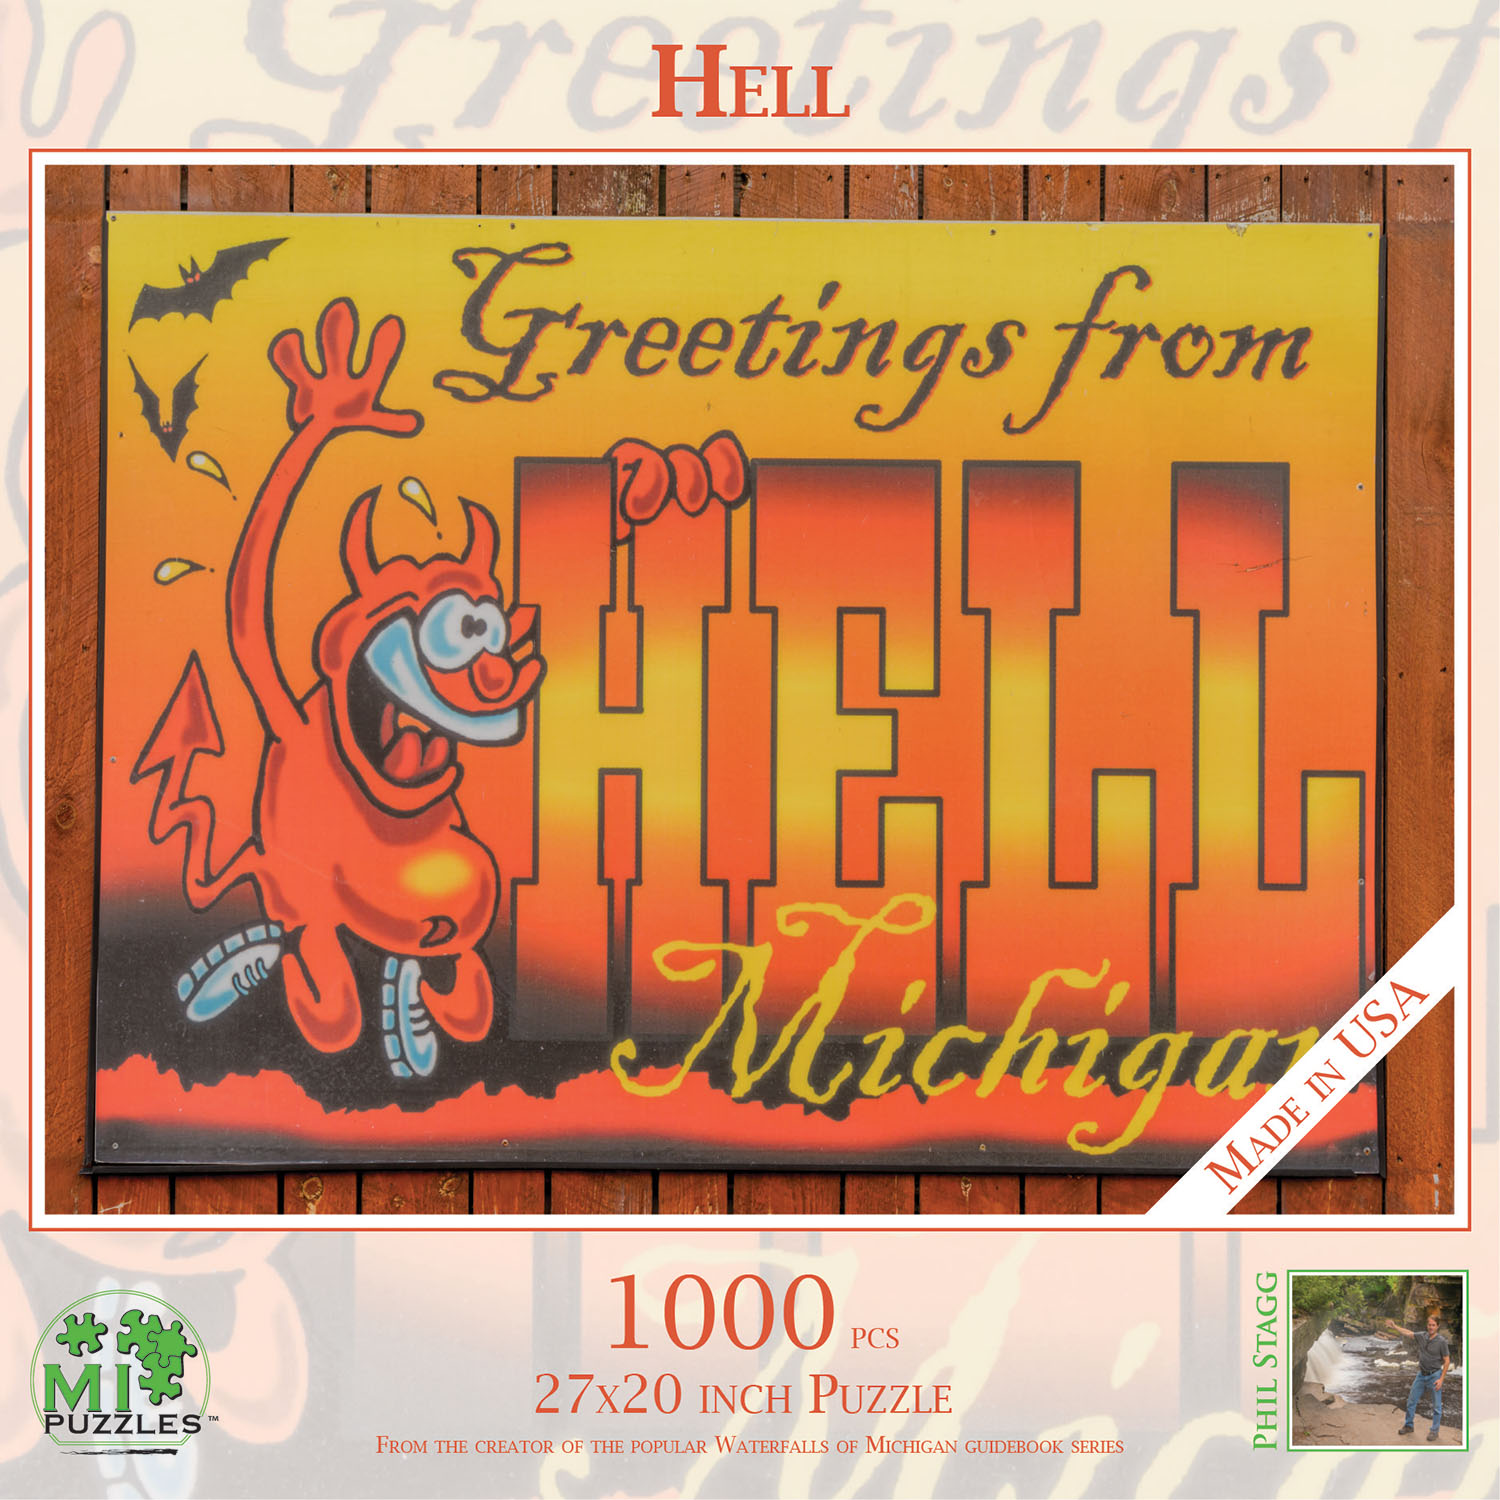 Hell Humor Jigsaw Puzzle